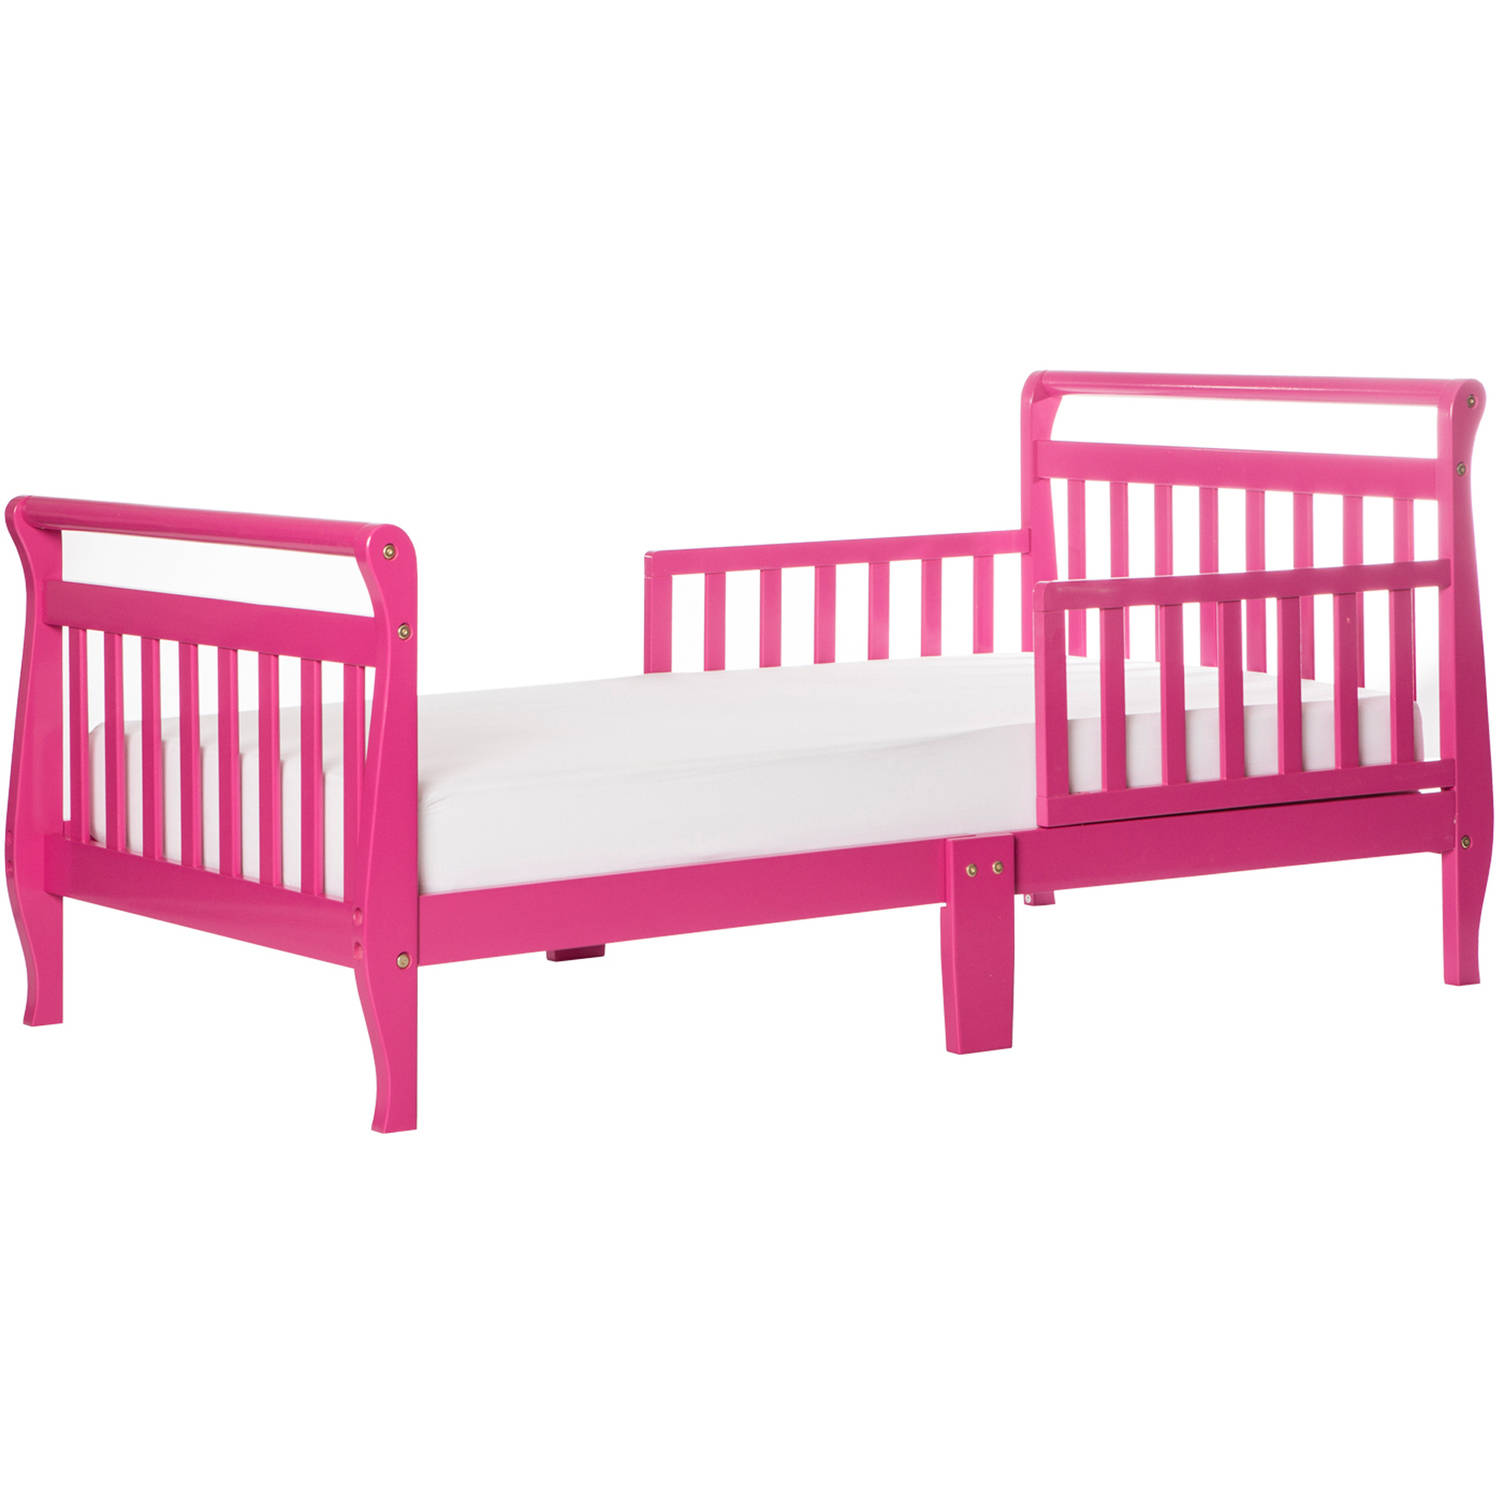 Dream On Me Sleigh Toddler Bed, Fuschia Pink - image 1 of 3